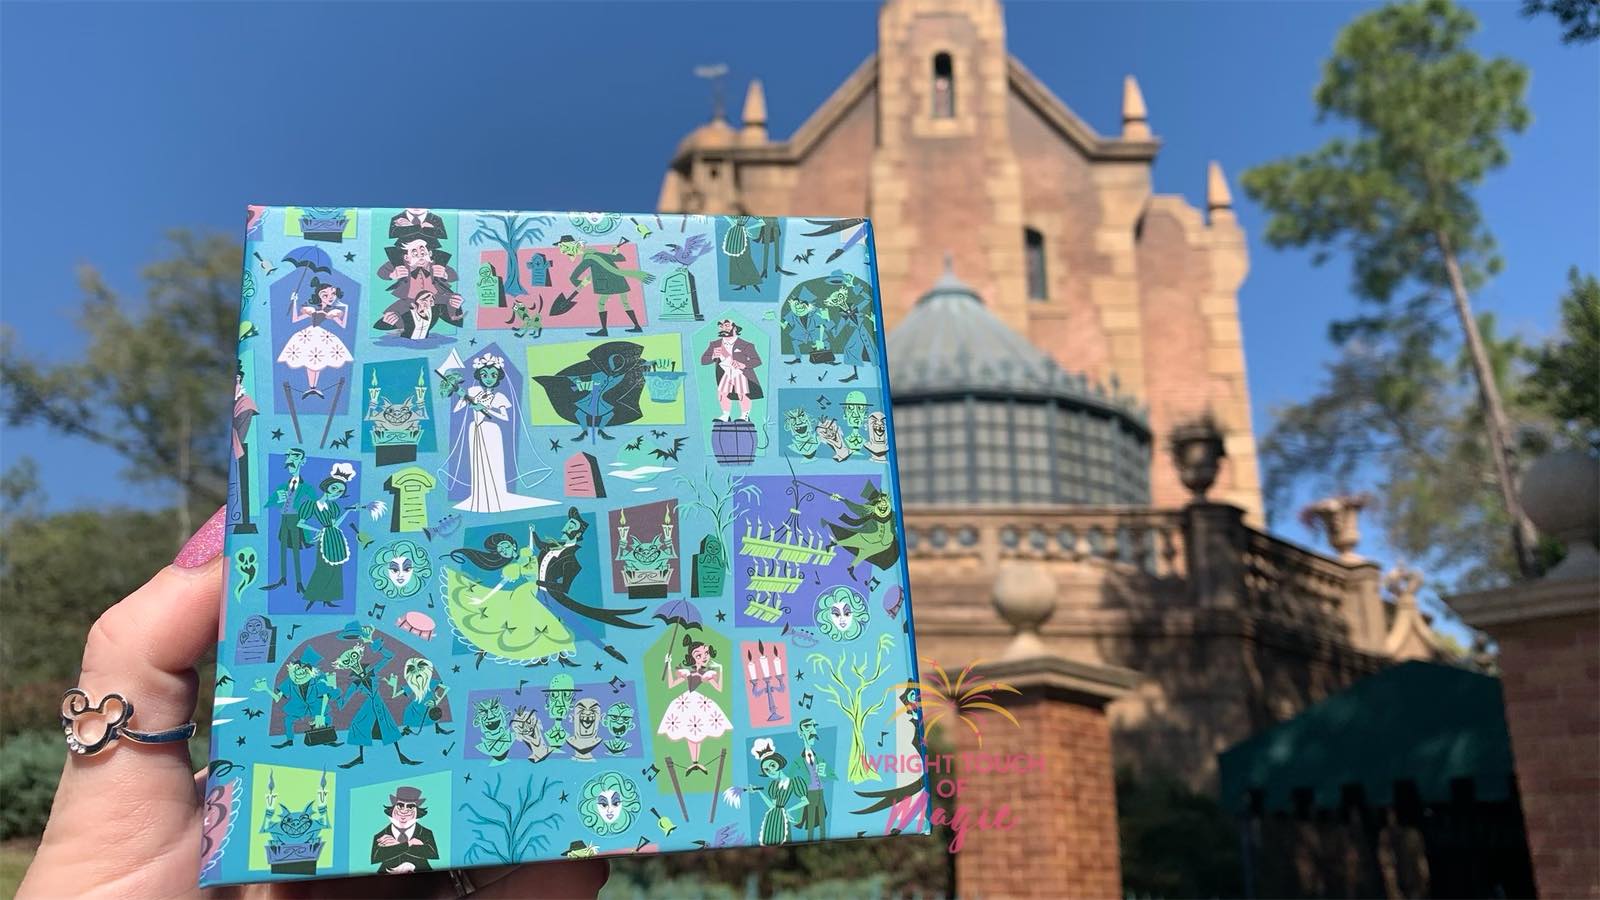 New Dooney & Bourke Haunted Mansion Magic Band materializes at the Magic Kingdom